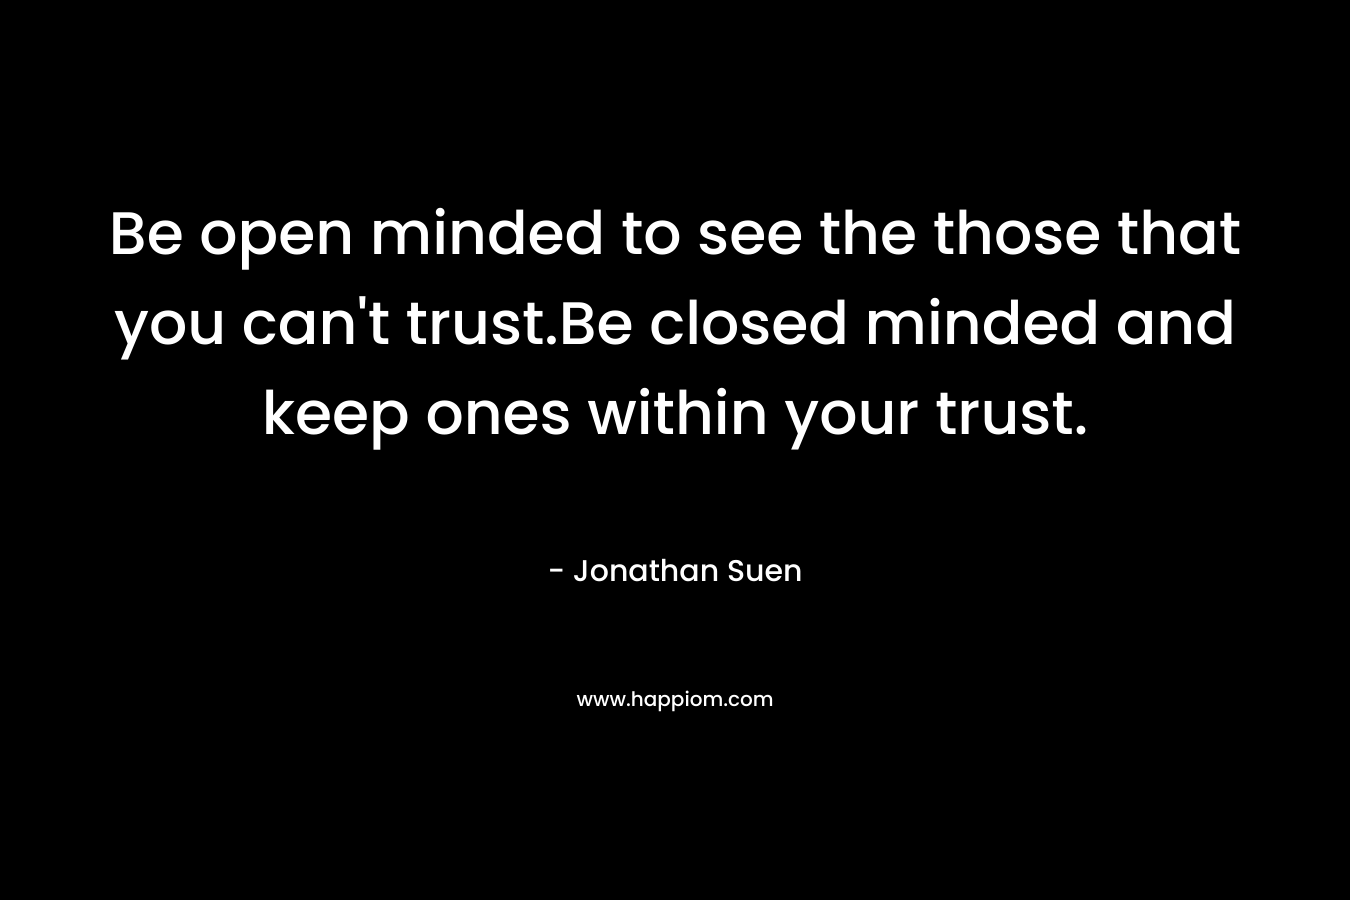 Be open minded to see the those that you can't trust.Be closed minded and keep ones within your trust.